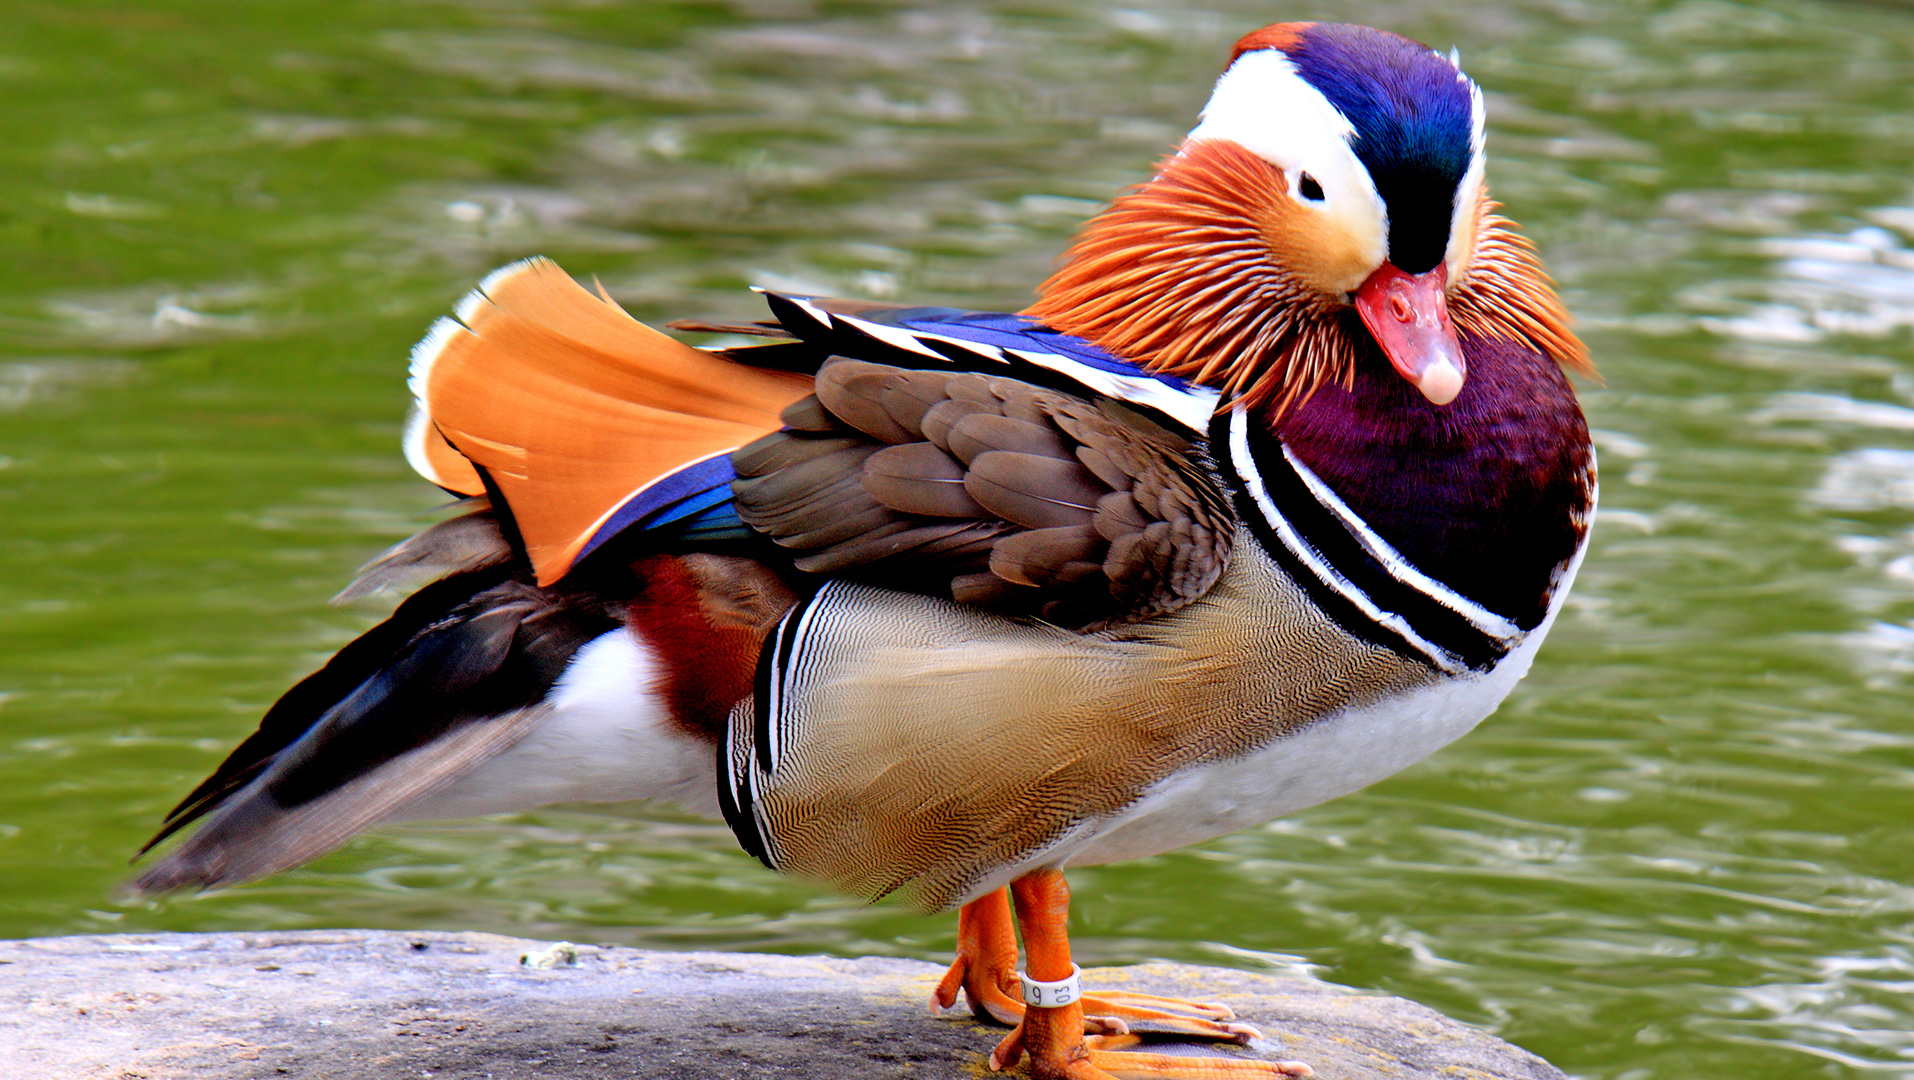 The Most Beautiful Duck in the World': Mandarin Duck Sighted Again in Western Canada Lake | The Epoch Times